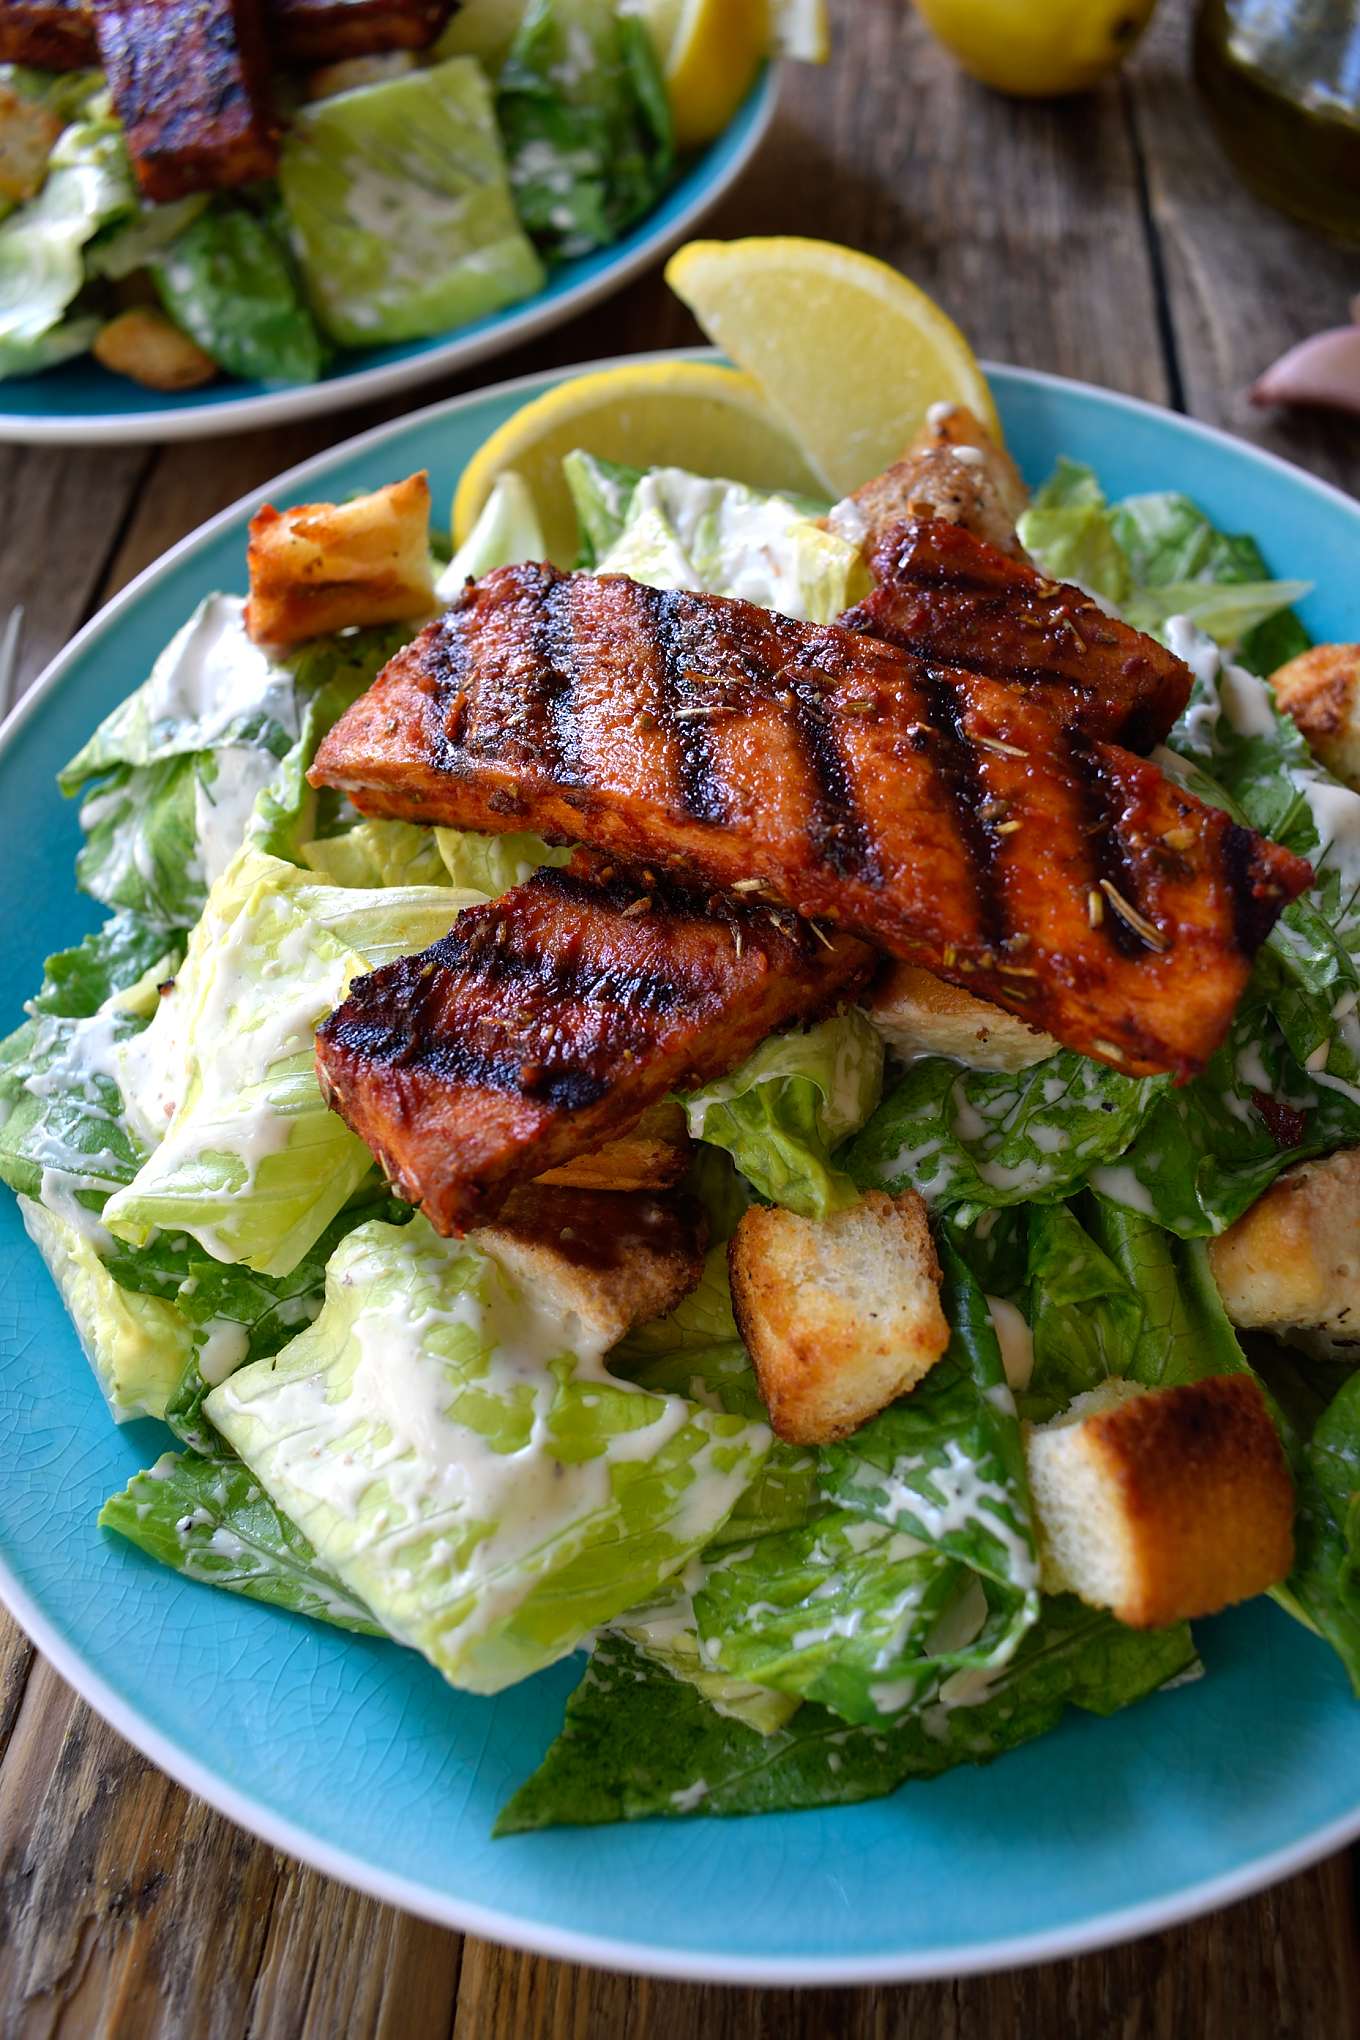 Vegan caesar salad makes a tasty and filling lunch or a light dinner. The vegan caesar dressing is made with aquafaba and is very easy to put together. 